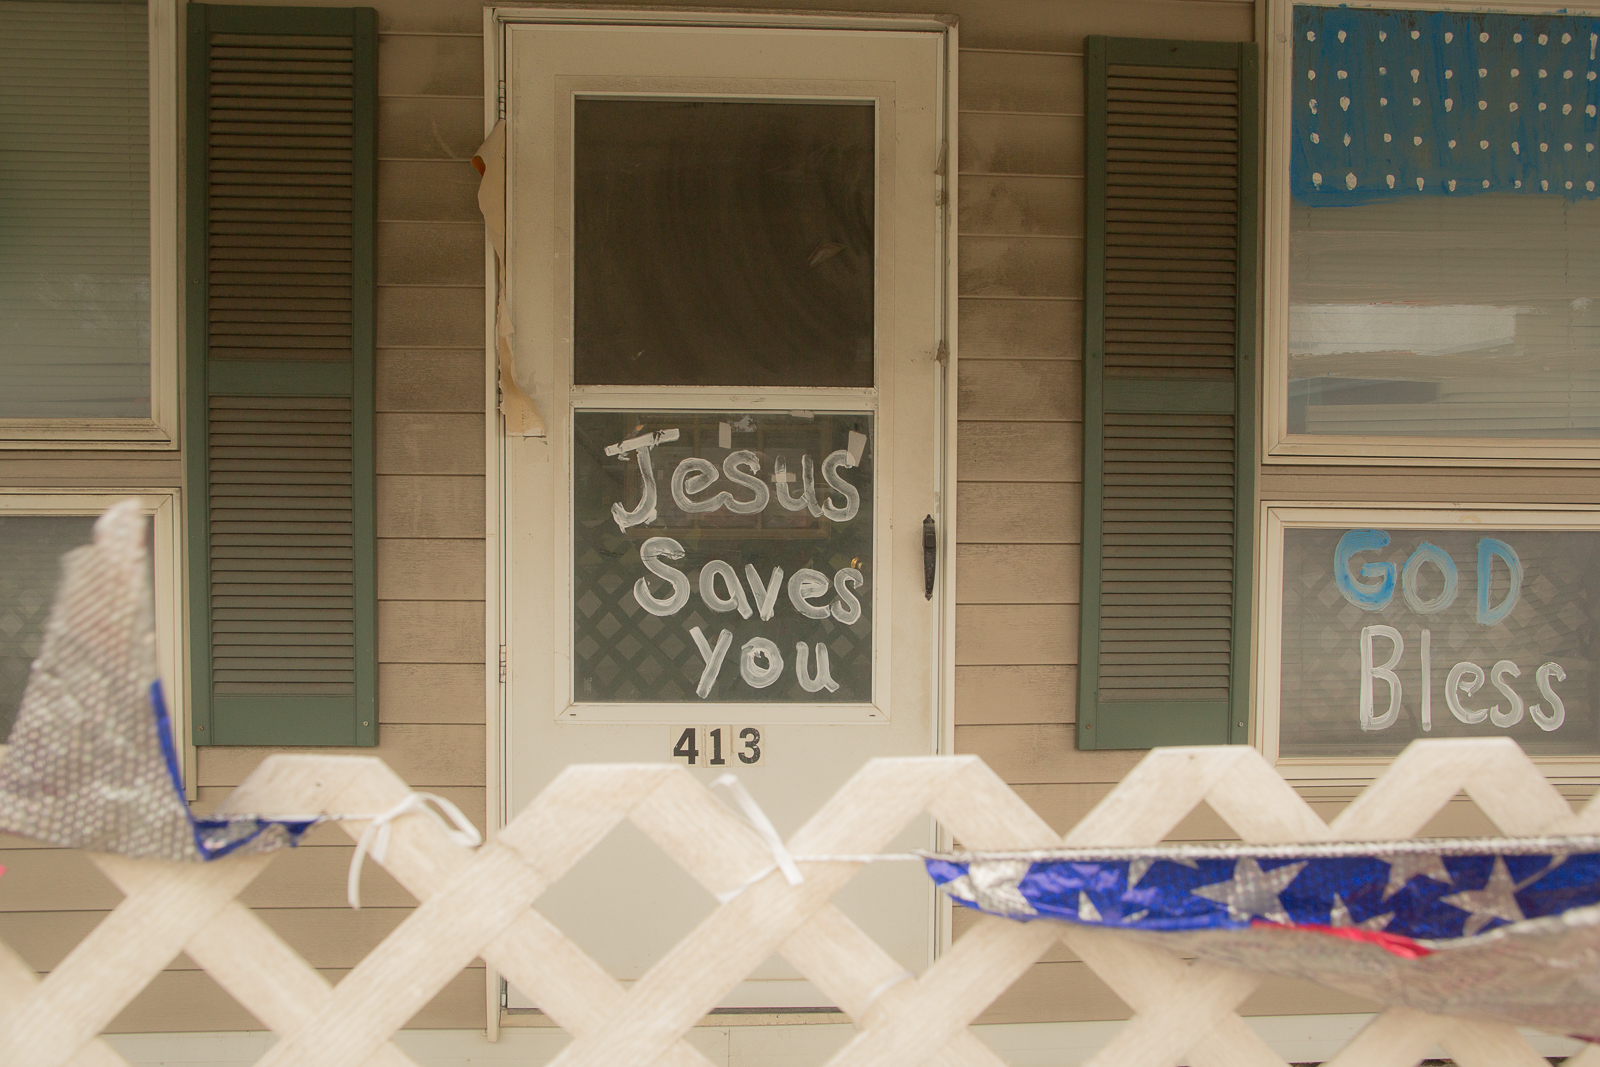 'Jesus saves you' sign on old door with a screen